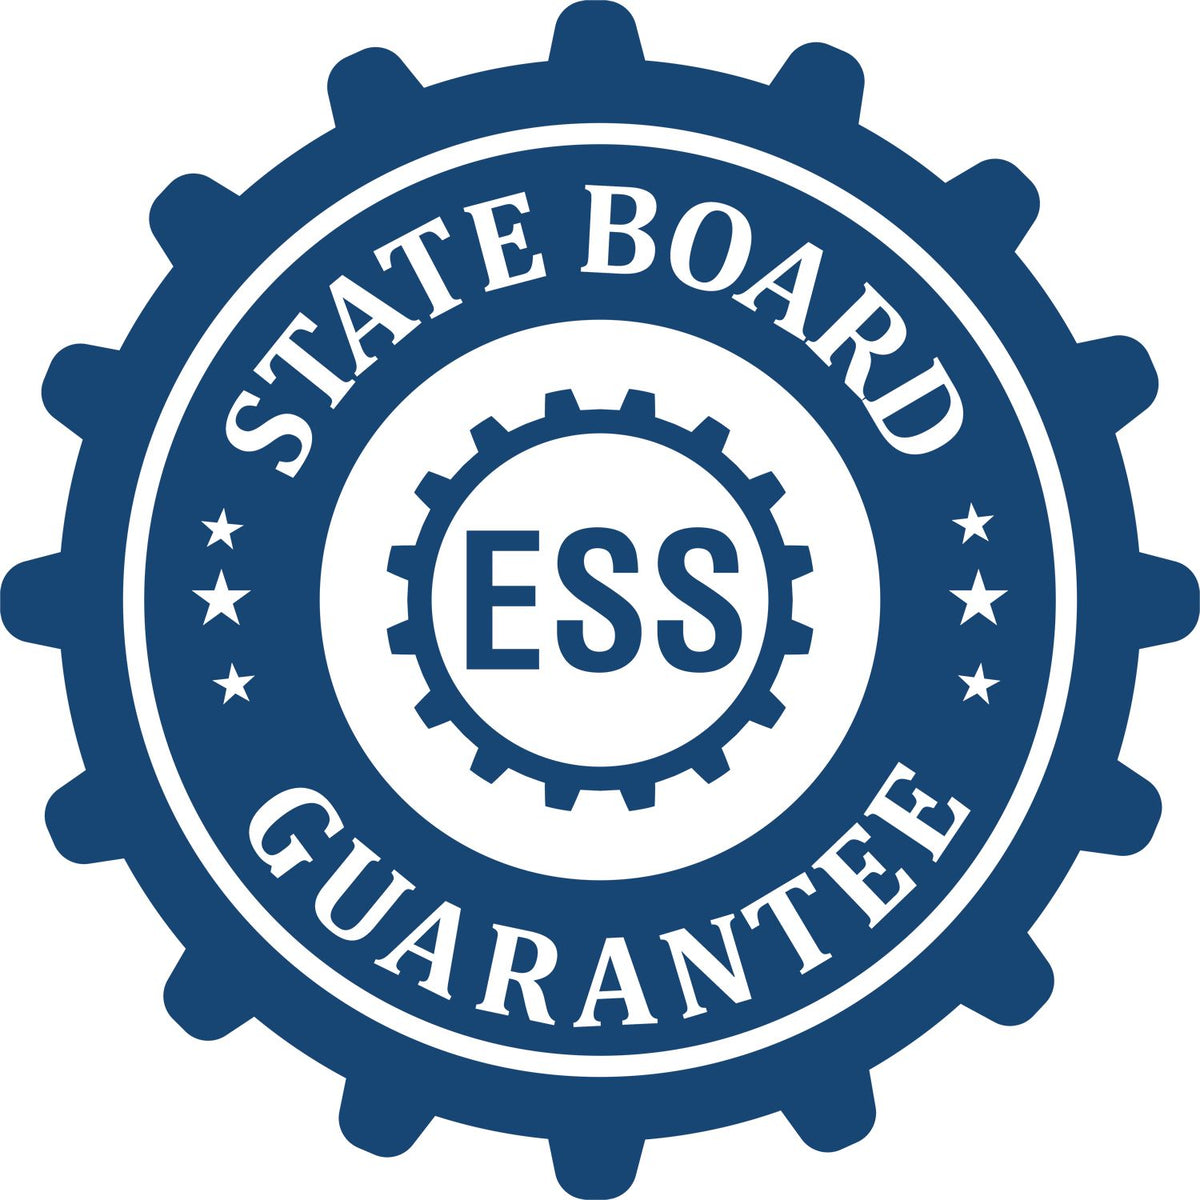 An emblem in a gear shape illustrating a state board guarantee for the Soft Arkansas Professional Engineer Seal product.